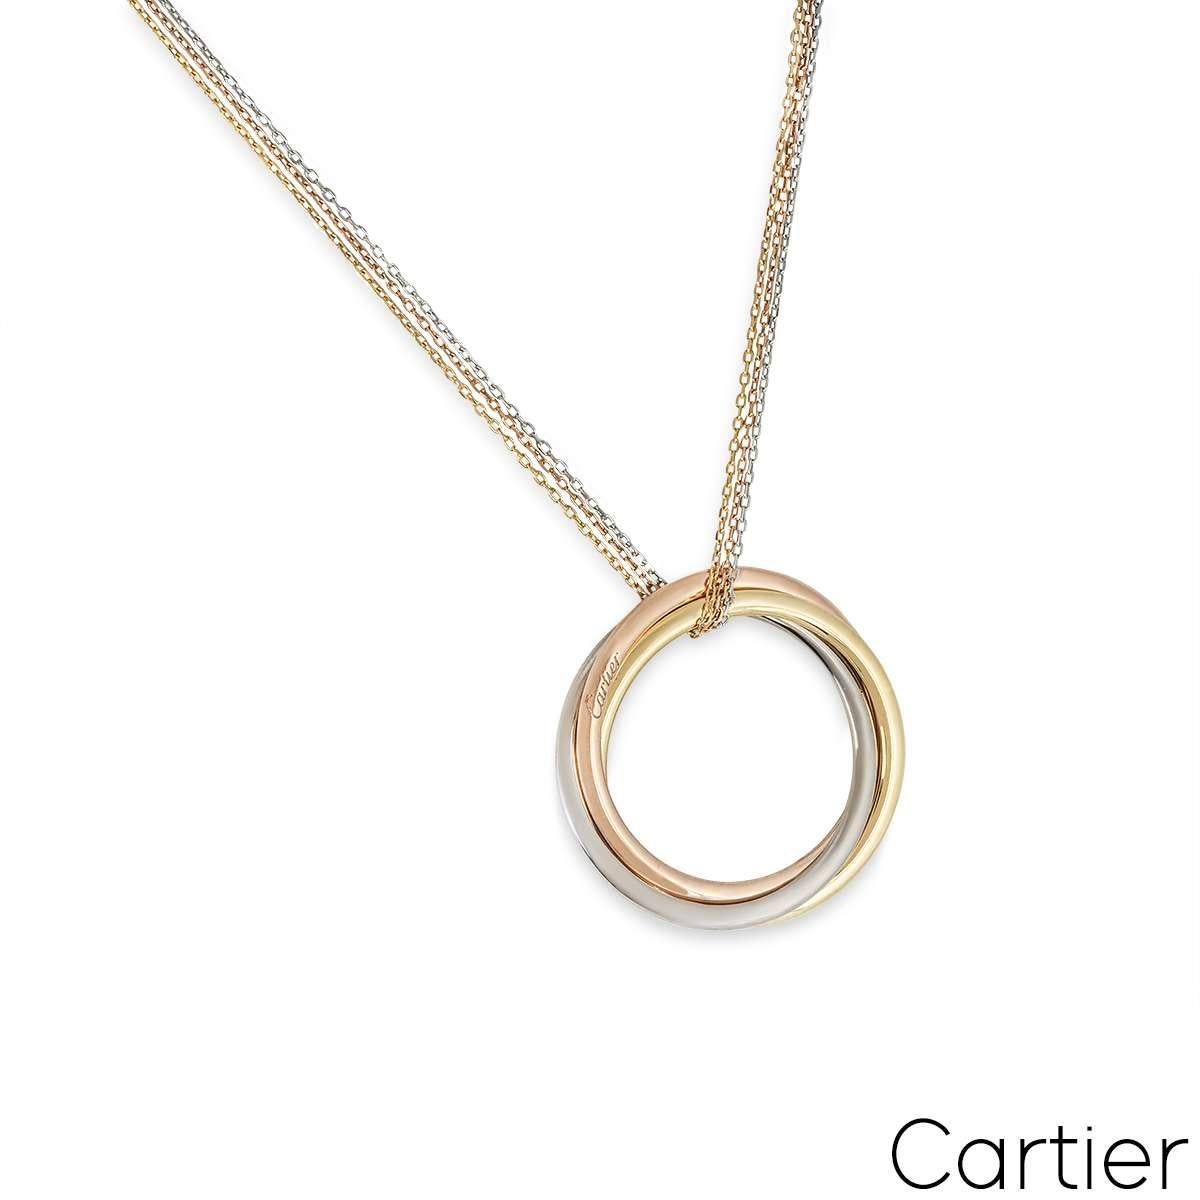 An alluring 18k tri-colour gold large necklace by Cartier from the Trinity De Cartier collection. The necklace is composed of three open-work circular motifs entwined in yellow, white and rose gold.  The motifs have a diameter of 3.9cm and are